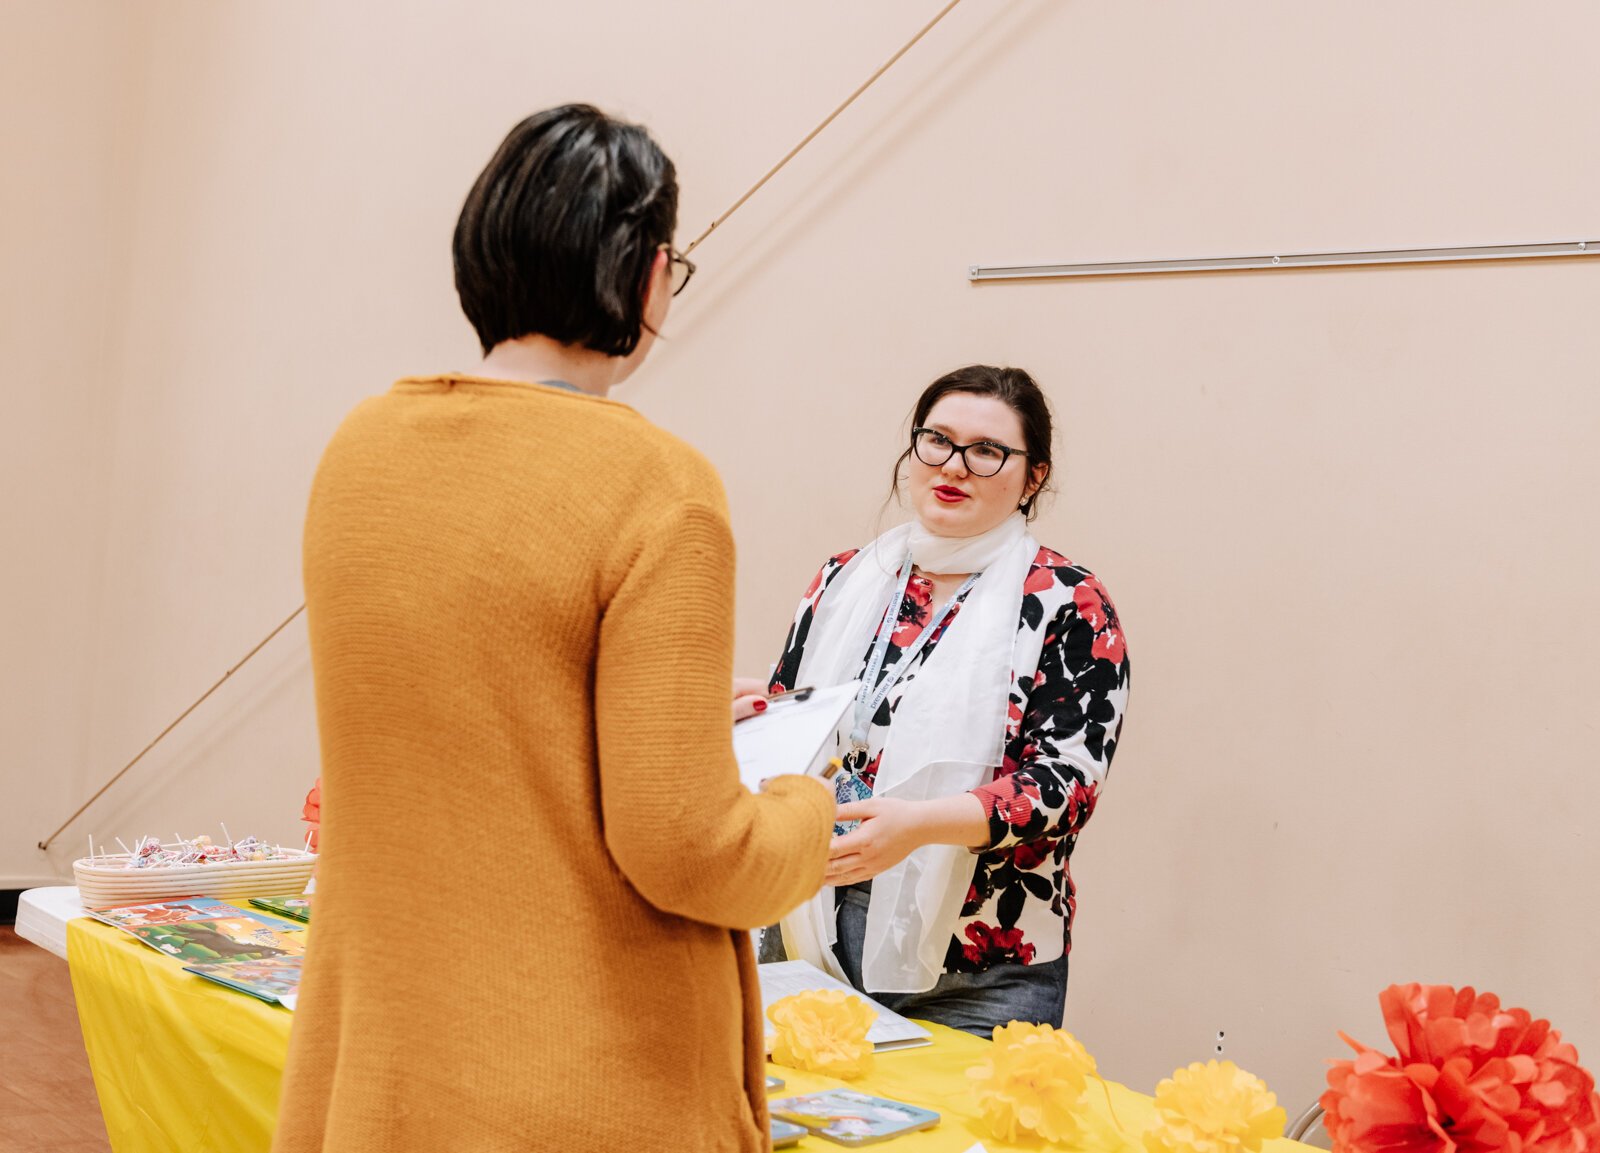 Bernadette Fellows, Community Engagement Planner with the City of Fort Wayne, right, talks with Jessica Porter, who is a member of the church during the Fall Fest event at Harvester Missionary Church.